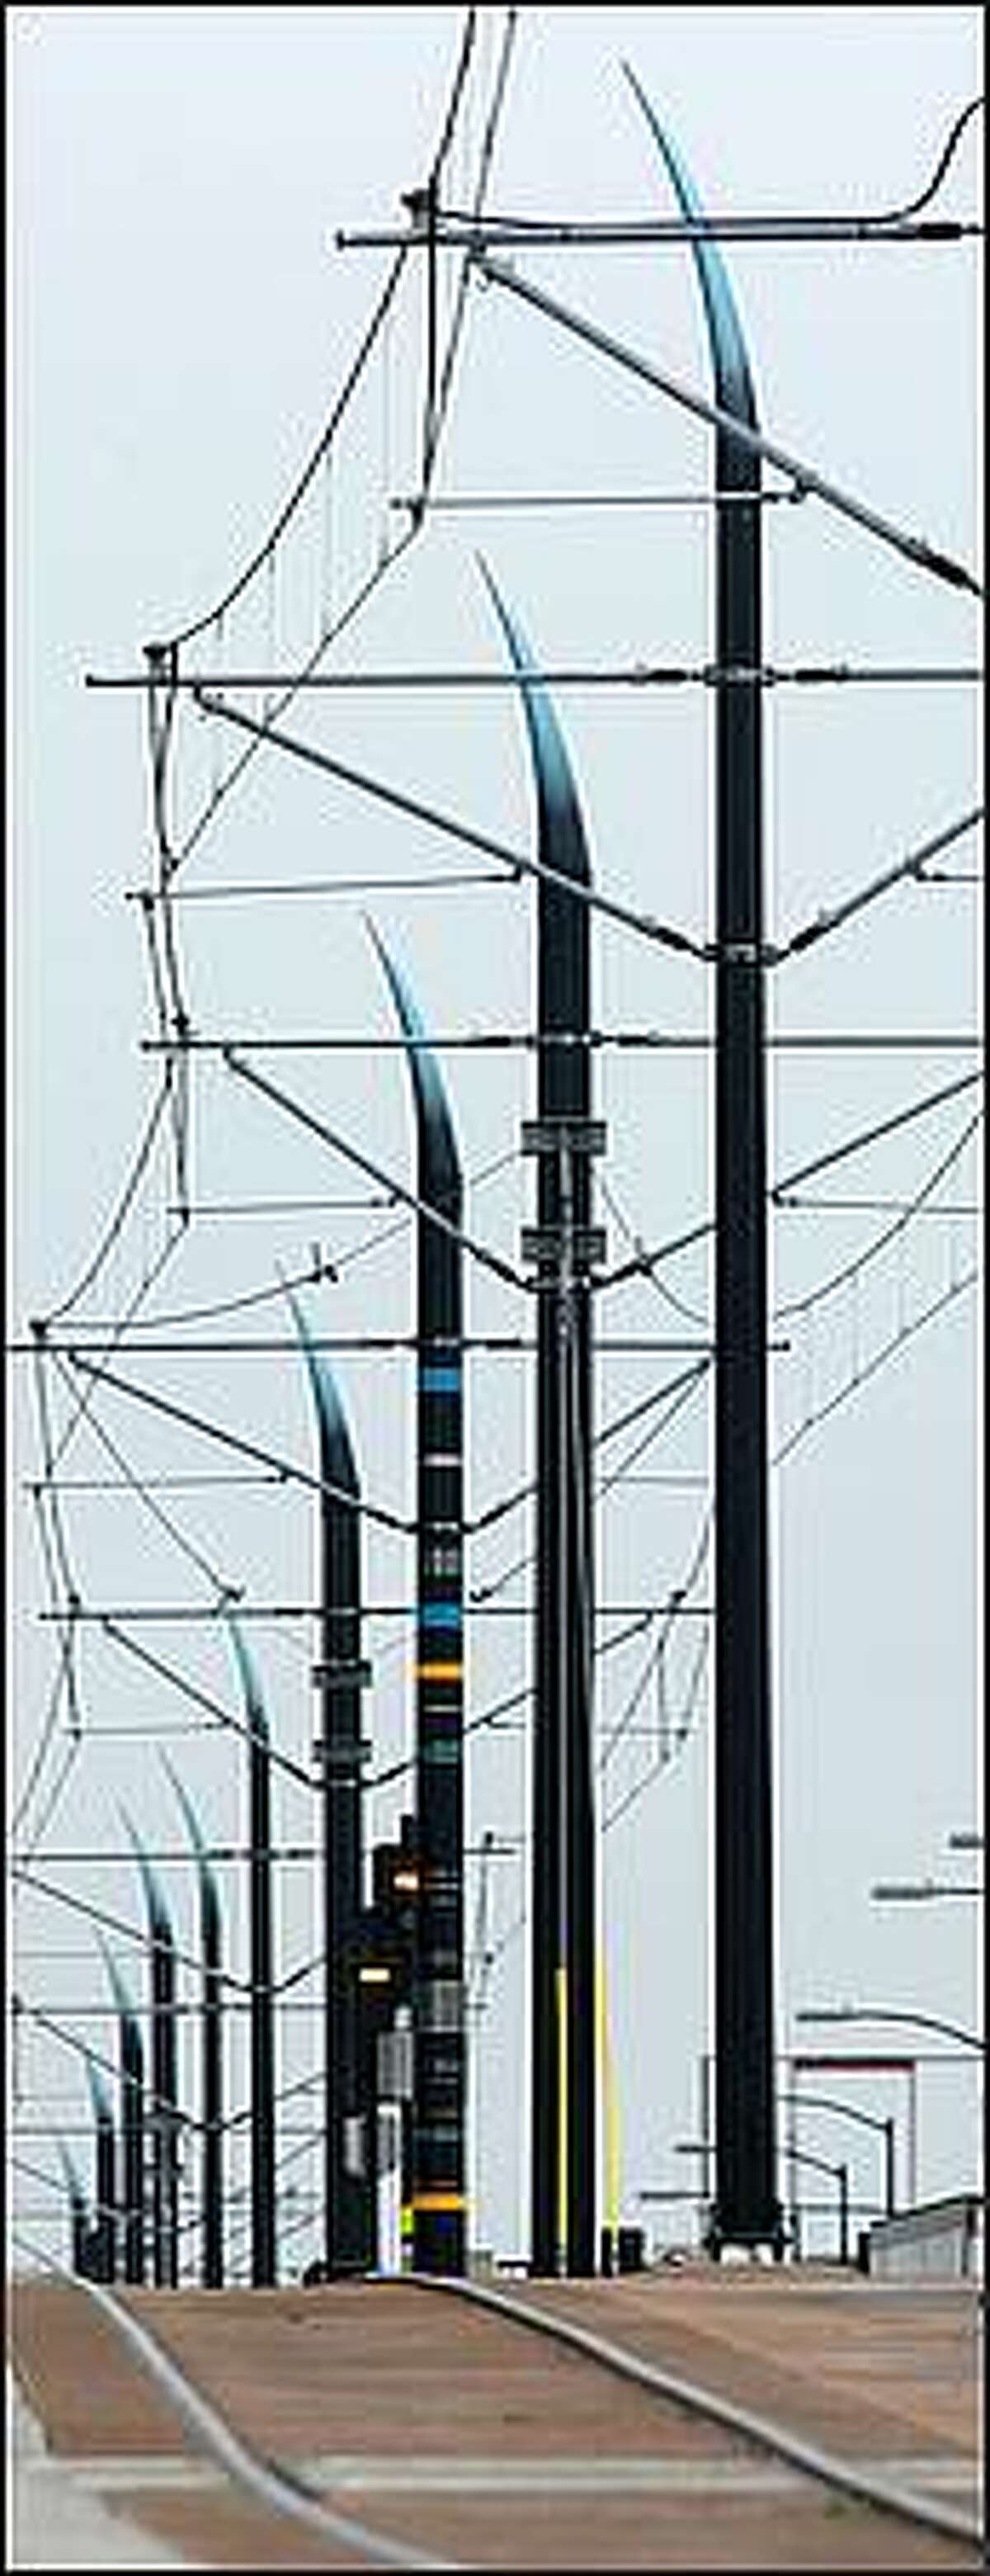 Claw-like poles that support power lines along the Sound Transit Link light rail line. Thursday, Sept. 25, 2008.